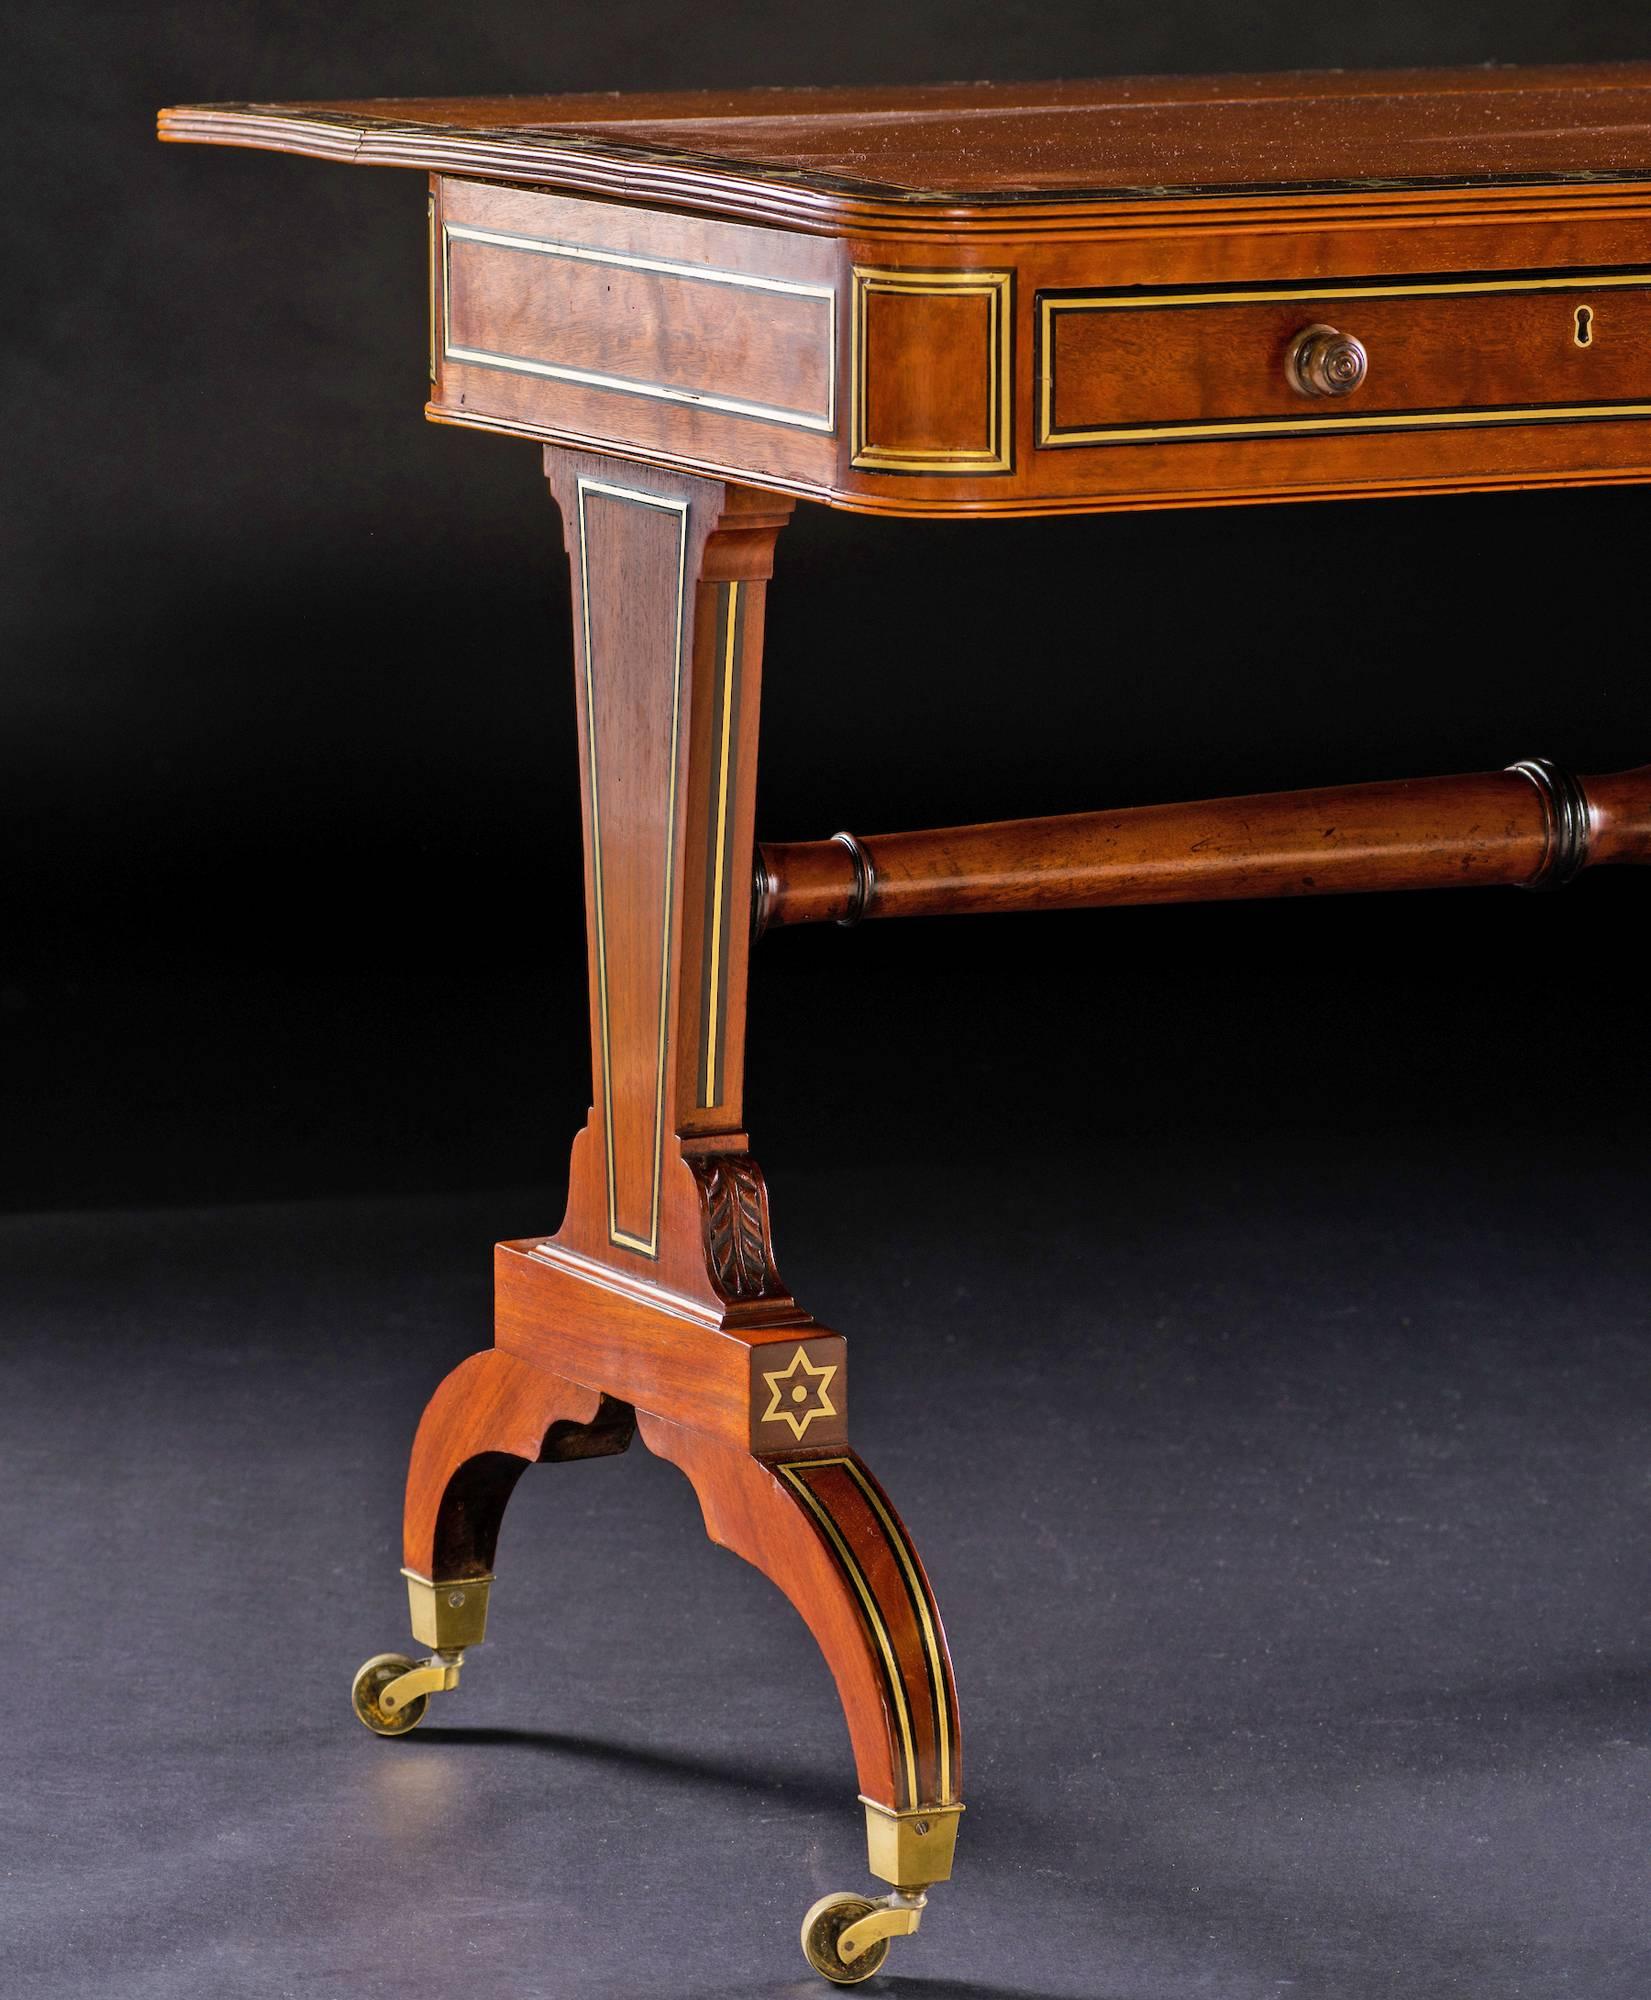 Rare Regency Brass and Ebony-Inlaid Mahogany One Leaf Sofa Table In Excellent Condition For Sale In New York, NY